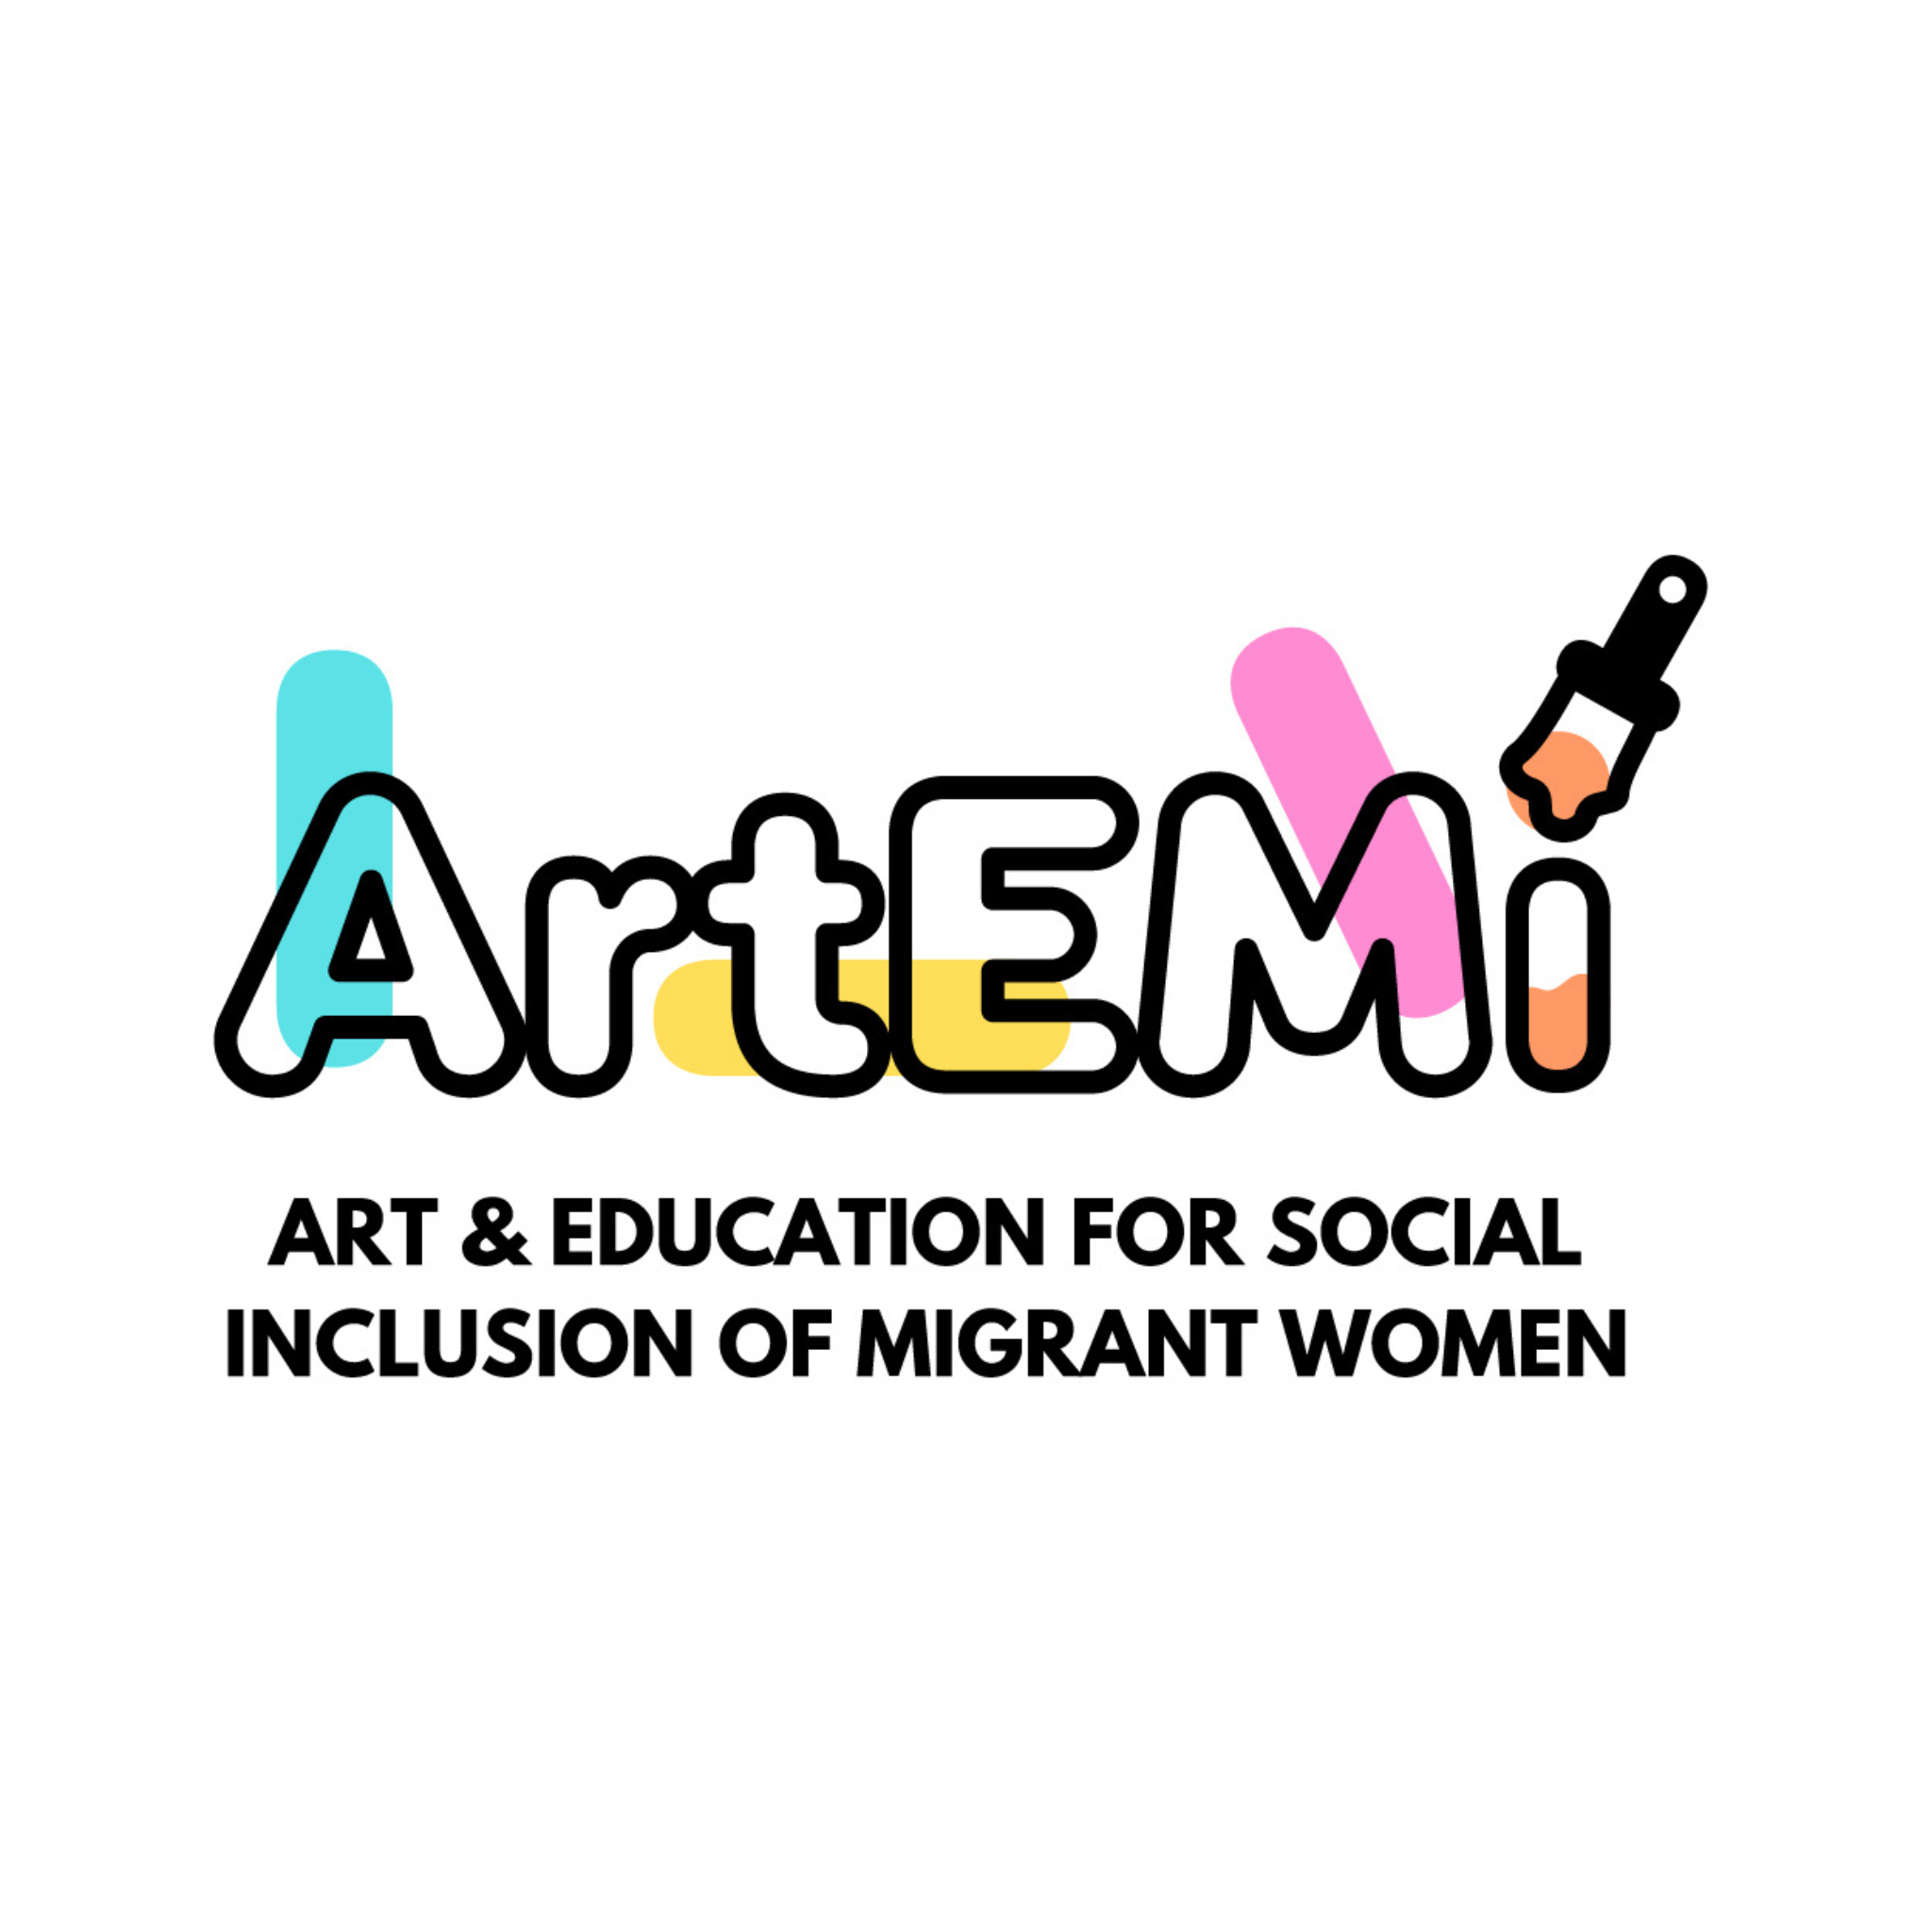 Introducing ARTEIM – Art Education for Social Inclusion of Migrant Women!